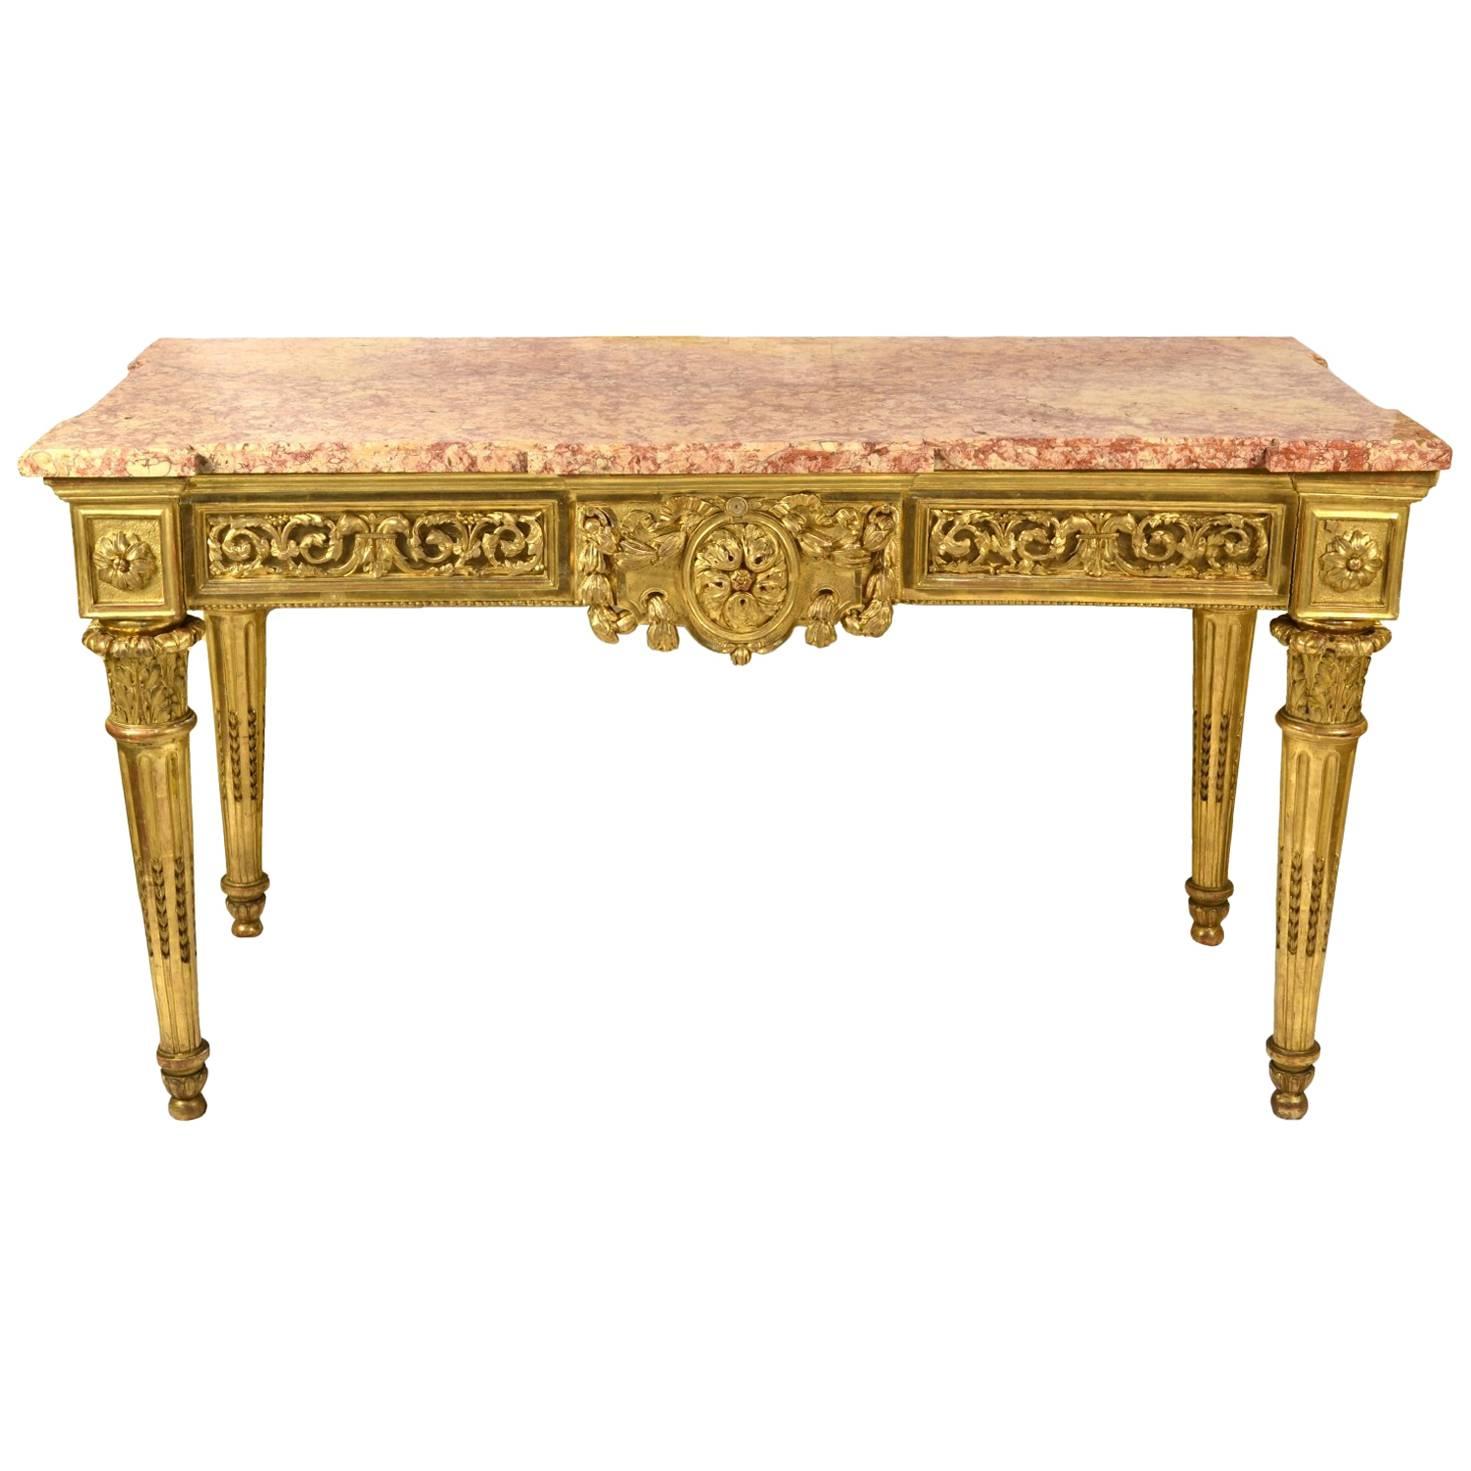 Italian Carved and Giltwood Neoclassical Console Table, circa 1790-1800 For Sale